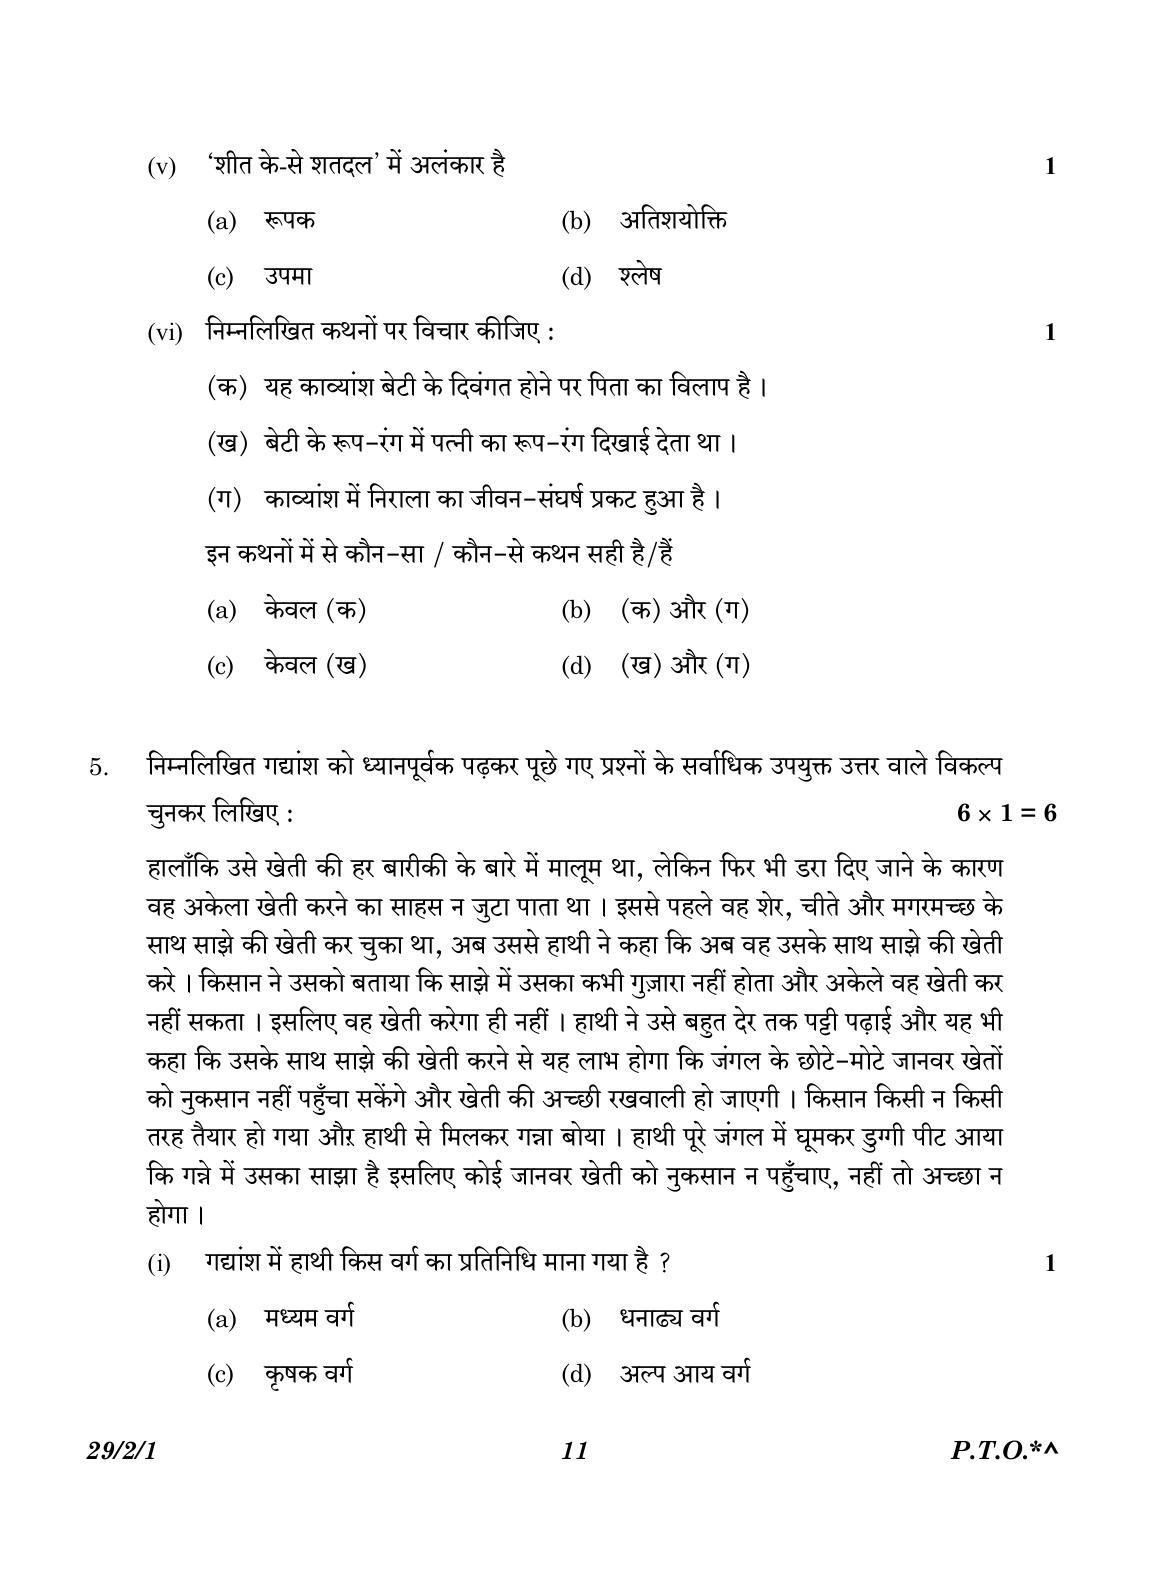 CBSE Class 12 29-2-1 Hindi Elective 2023 Question Paper - Page 11